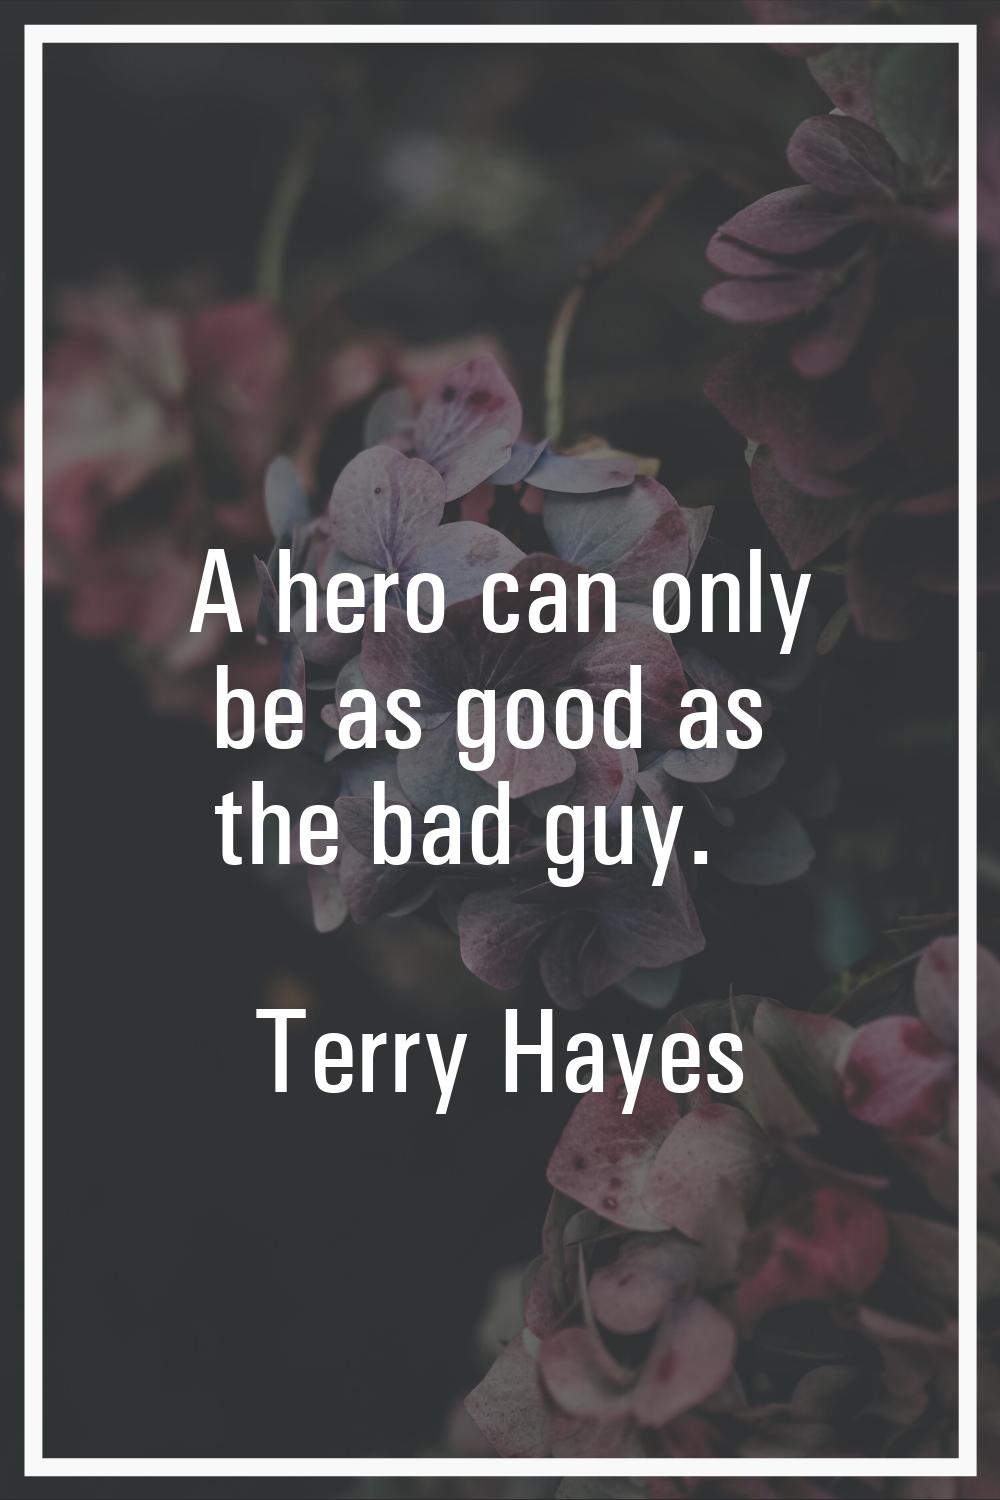 A hero can only be as good as the bad guy.